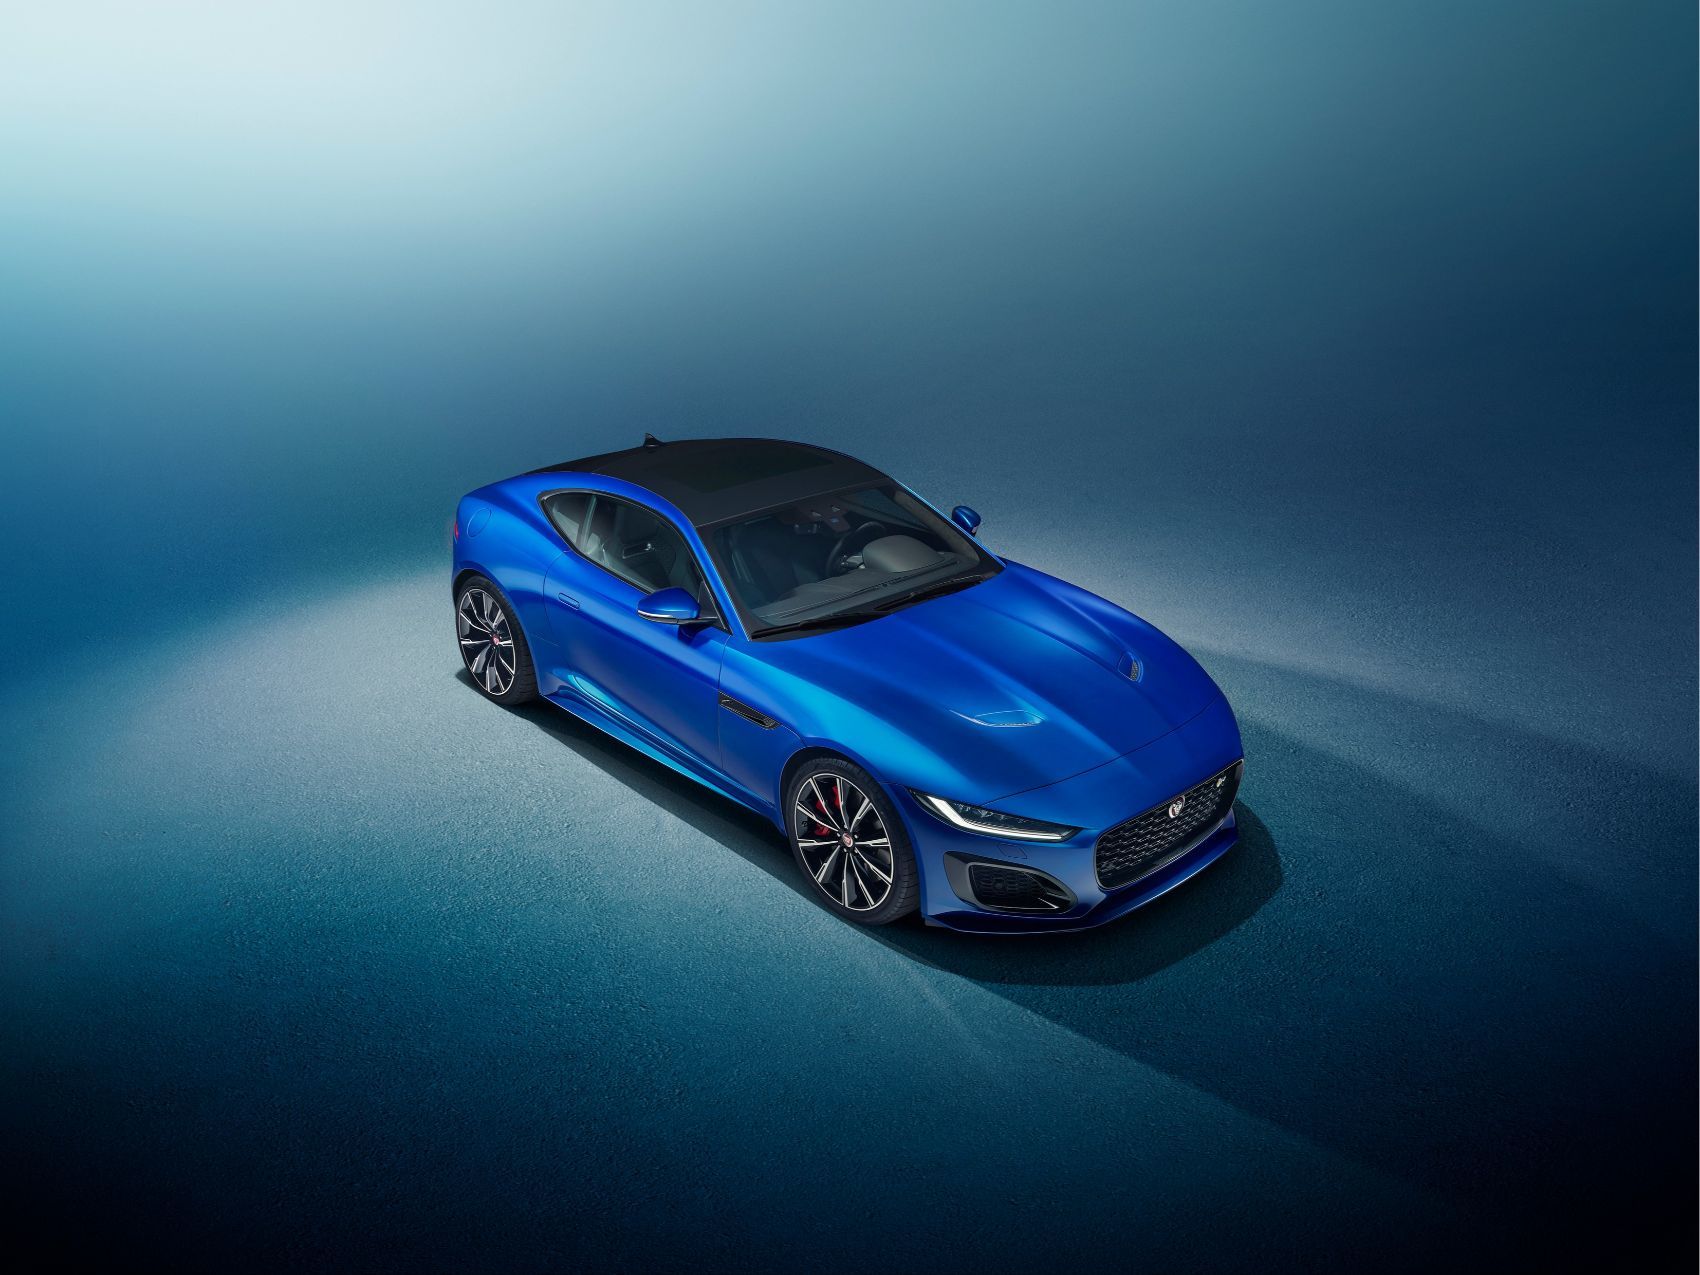 2021 Jaguar F Type New In Velocity Blue But Still Red Hot